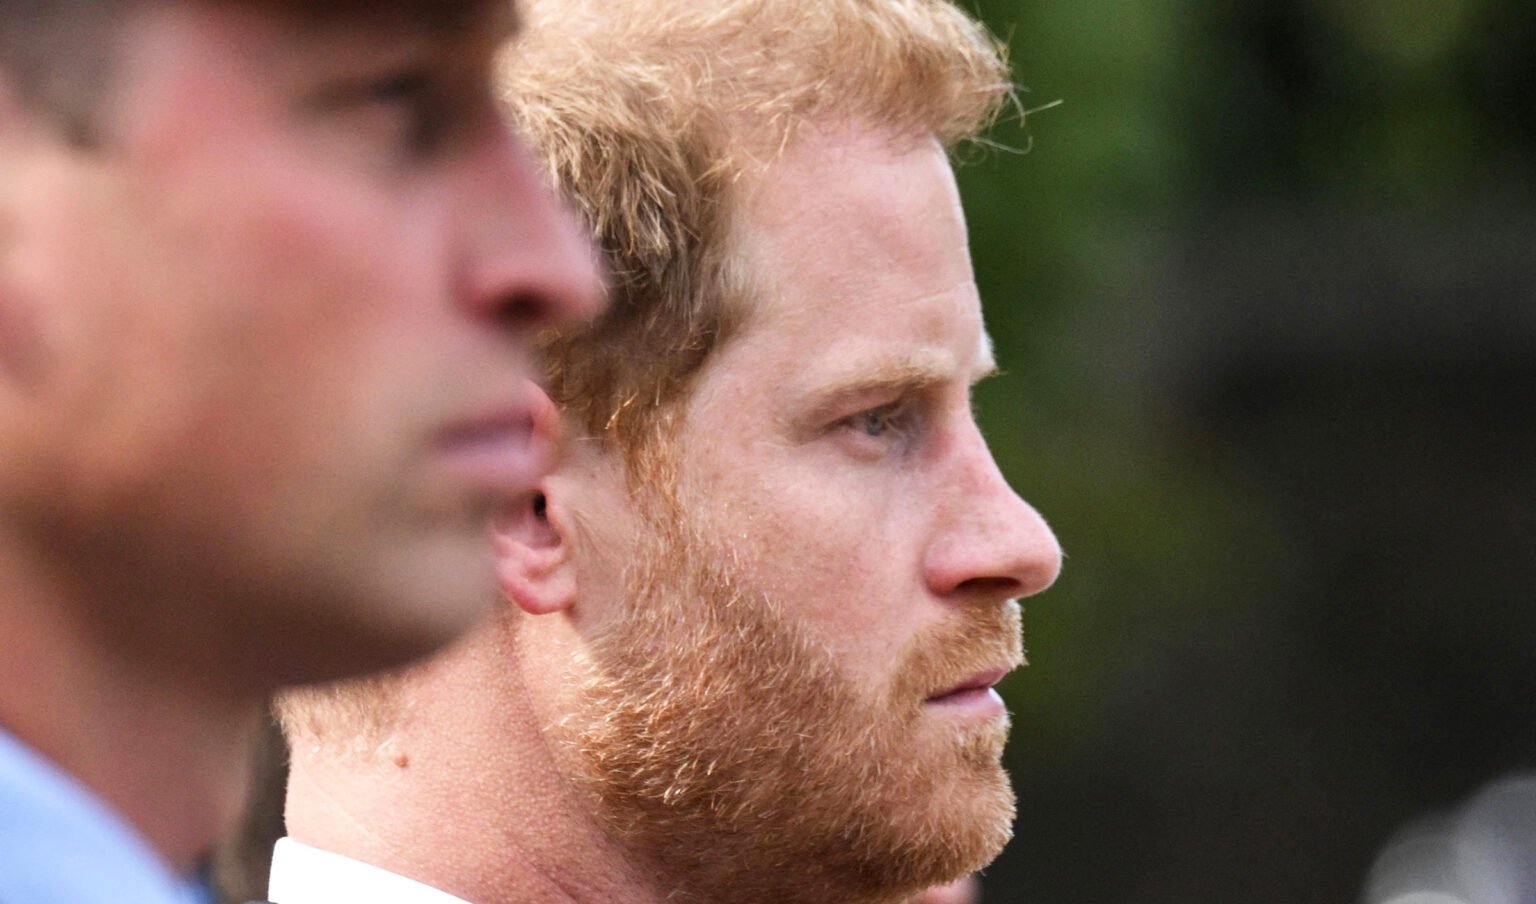 Prince Harry once suffered from a frostbitten penis at his brother’s royal wedding. But how did that happen?